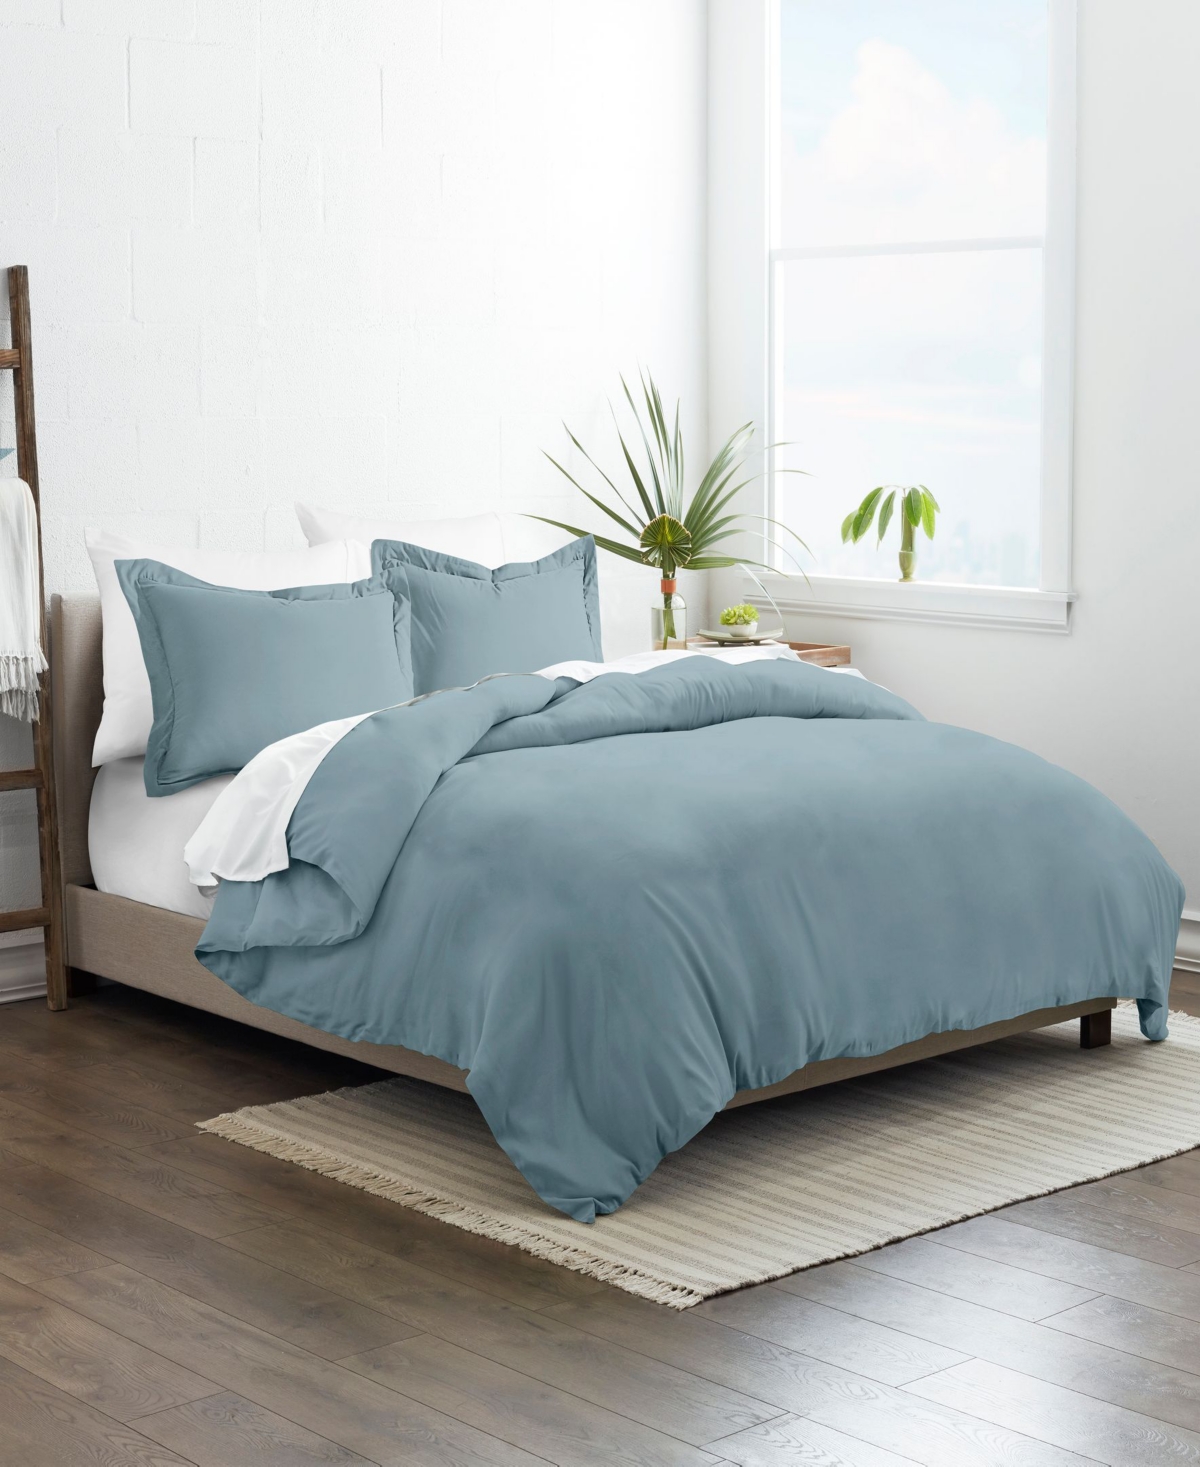 Ienjoy Home Dynamically Dashing Duvet Cover Set By The Home Collection, King/california King In Ocean